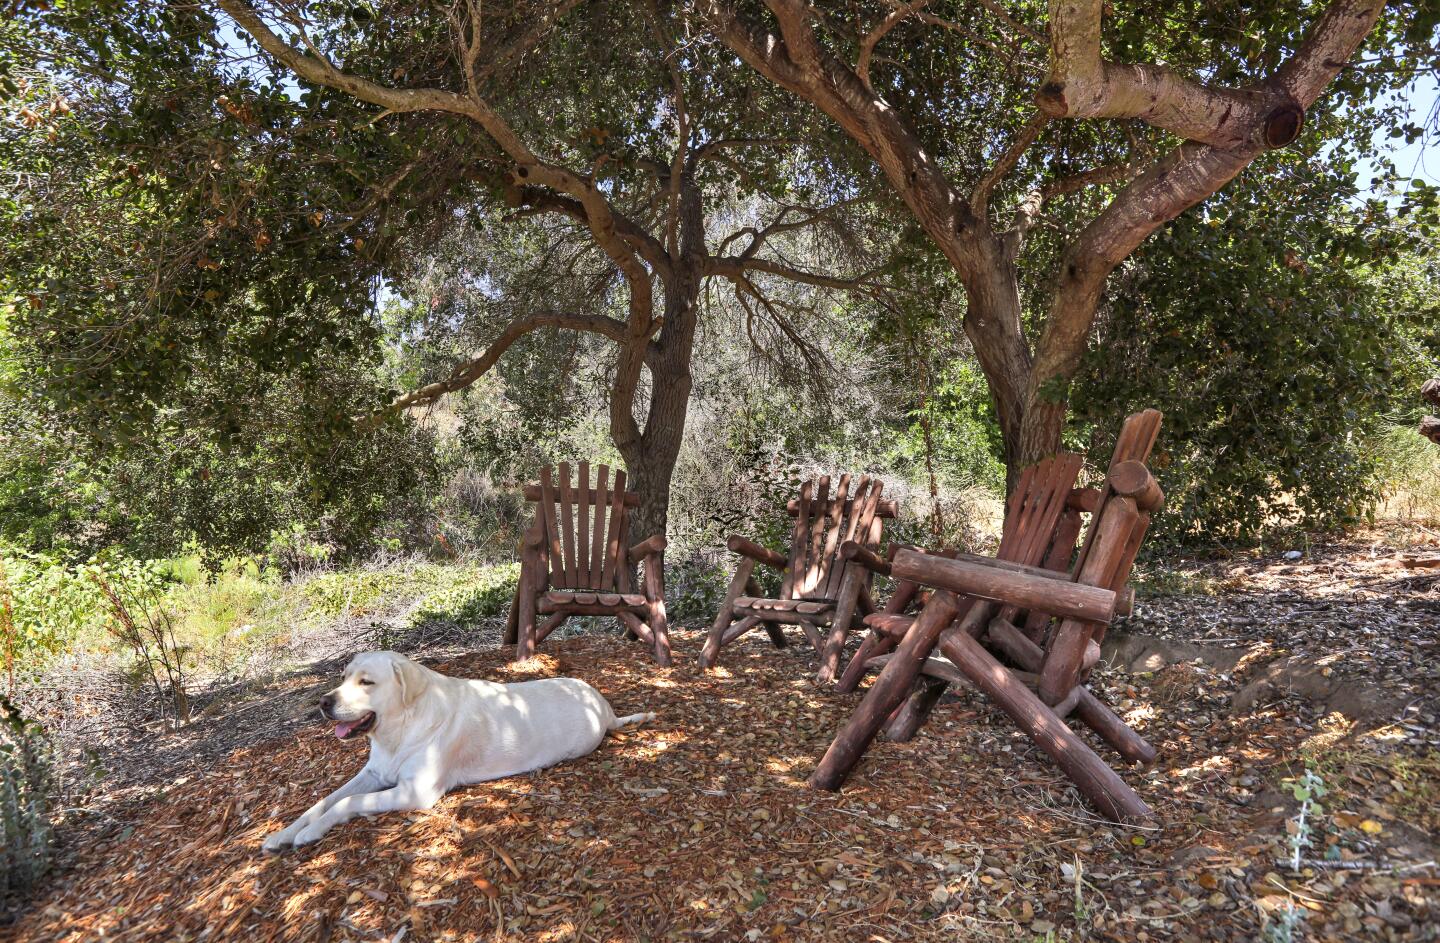 Bella relaxes in the shade of some oak trees at the Sand n' Straw Community Farm.